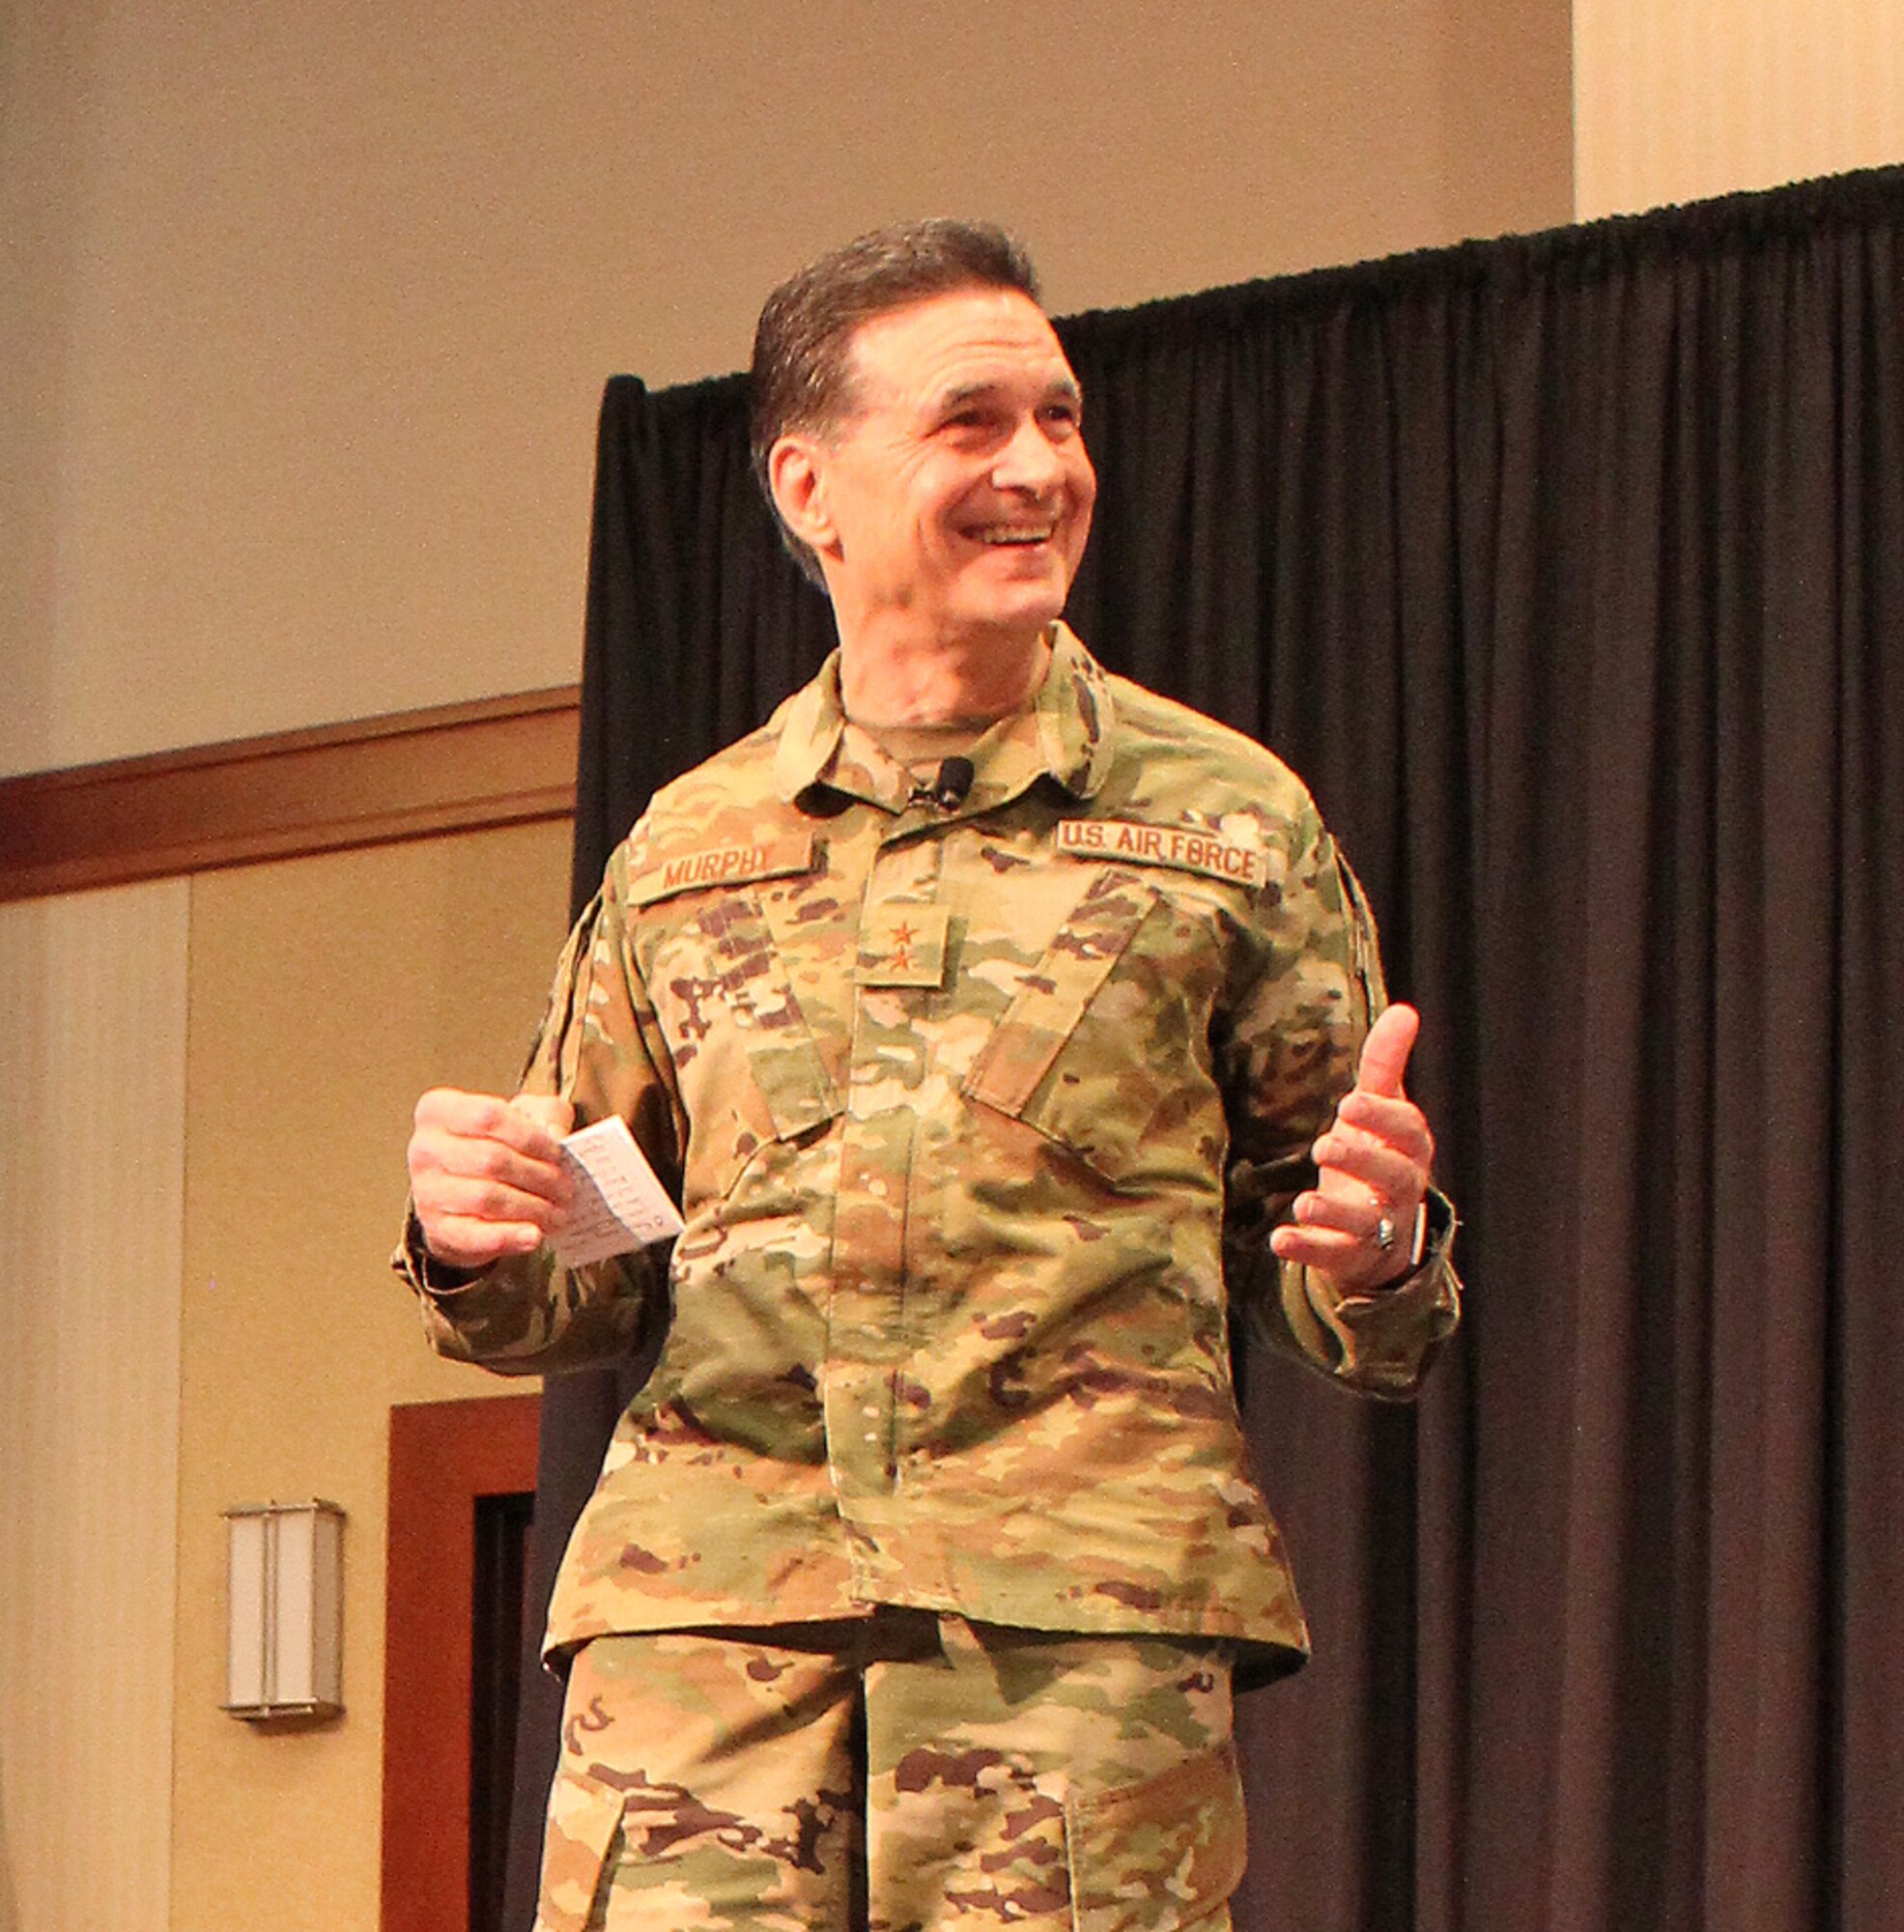 U.S. Air Force Maj. Gen. (Dr.) Sean L. Murphy, Deputy Surgeon General, speaks during the 2018 Air Force Medical Service Senior Leadership Workshop at the National Conference Center in Leesburg, Va., Dec. 5, 2018. Murphy, along with U.S Air Force Lt. Gen. Dorothy Hogg, Air Force Surgeon General, recognized Airmen as part of the Trusted Care “How Do You C.A.R.E.” campaign. (U.S. Air Force photo by Josh Mahler)